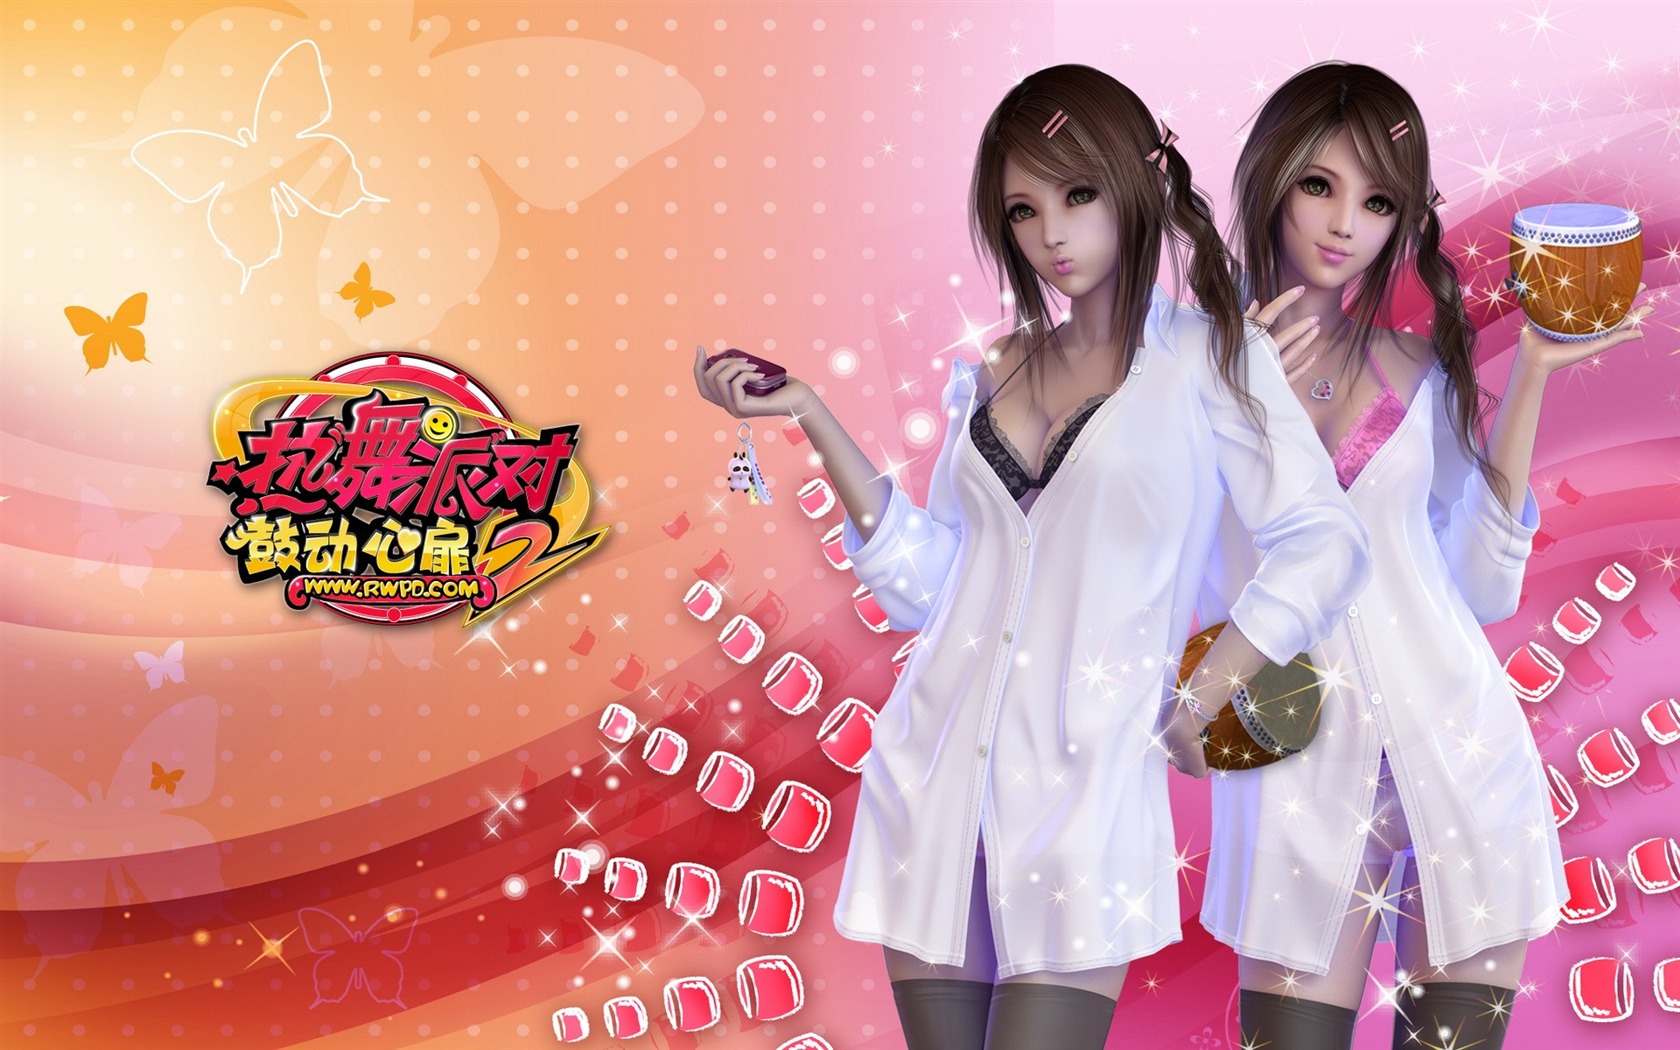 Online game Hot Dance Party II official wallpapers #12 - 1680x1050